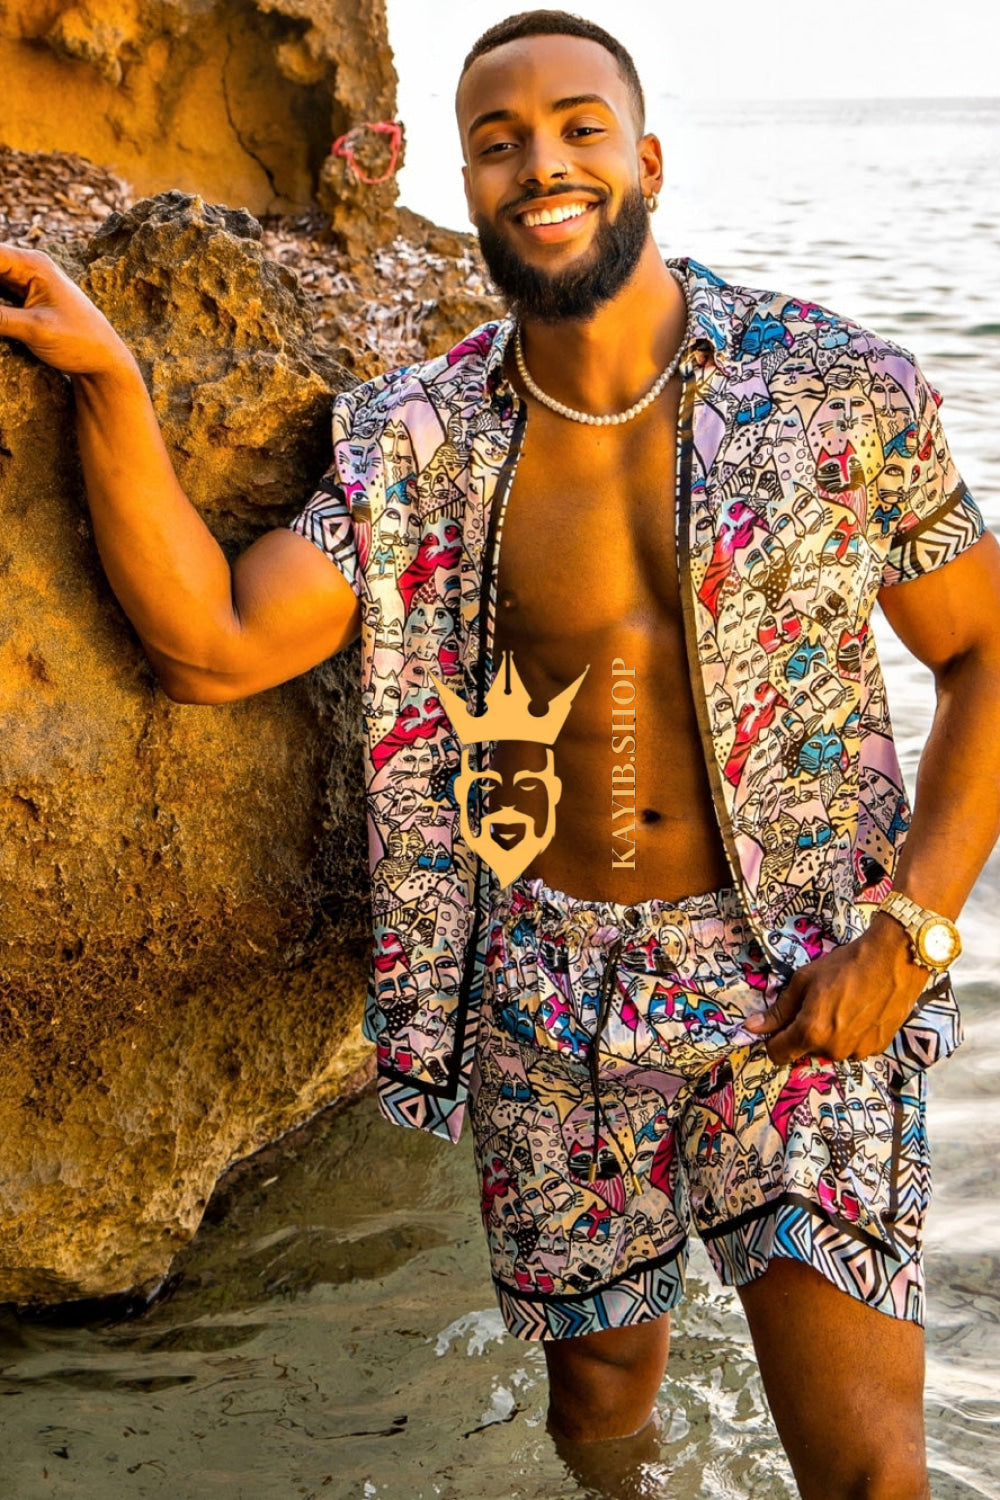 Silk Men's Summer Beachwear Set - Stand Out in Style with Luxurious Baroque-Inspired Design and Ultimate Comfort - kayibstrore